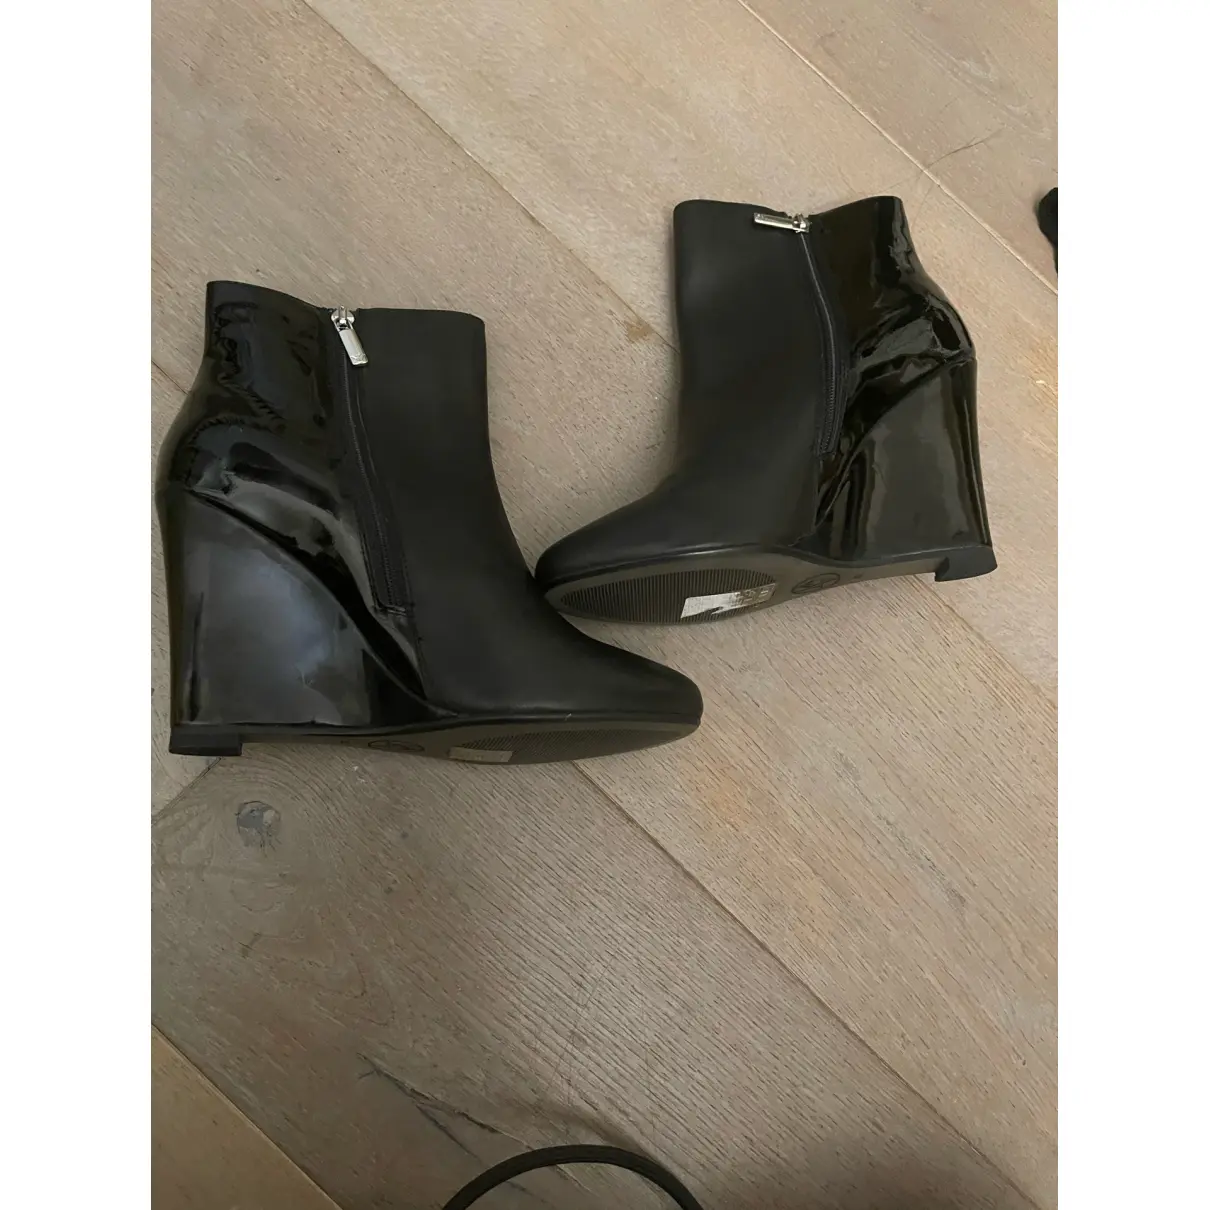 Buy Armani Jeans Leather ankle boots online